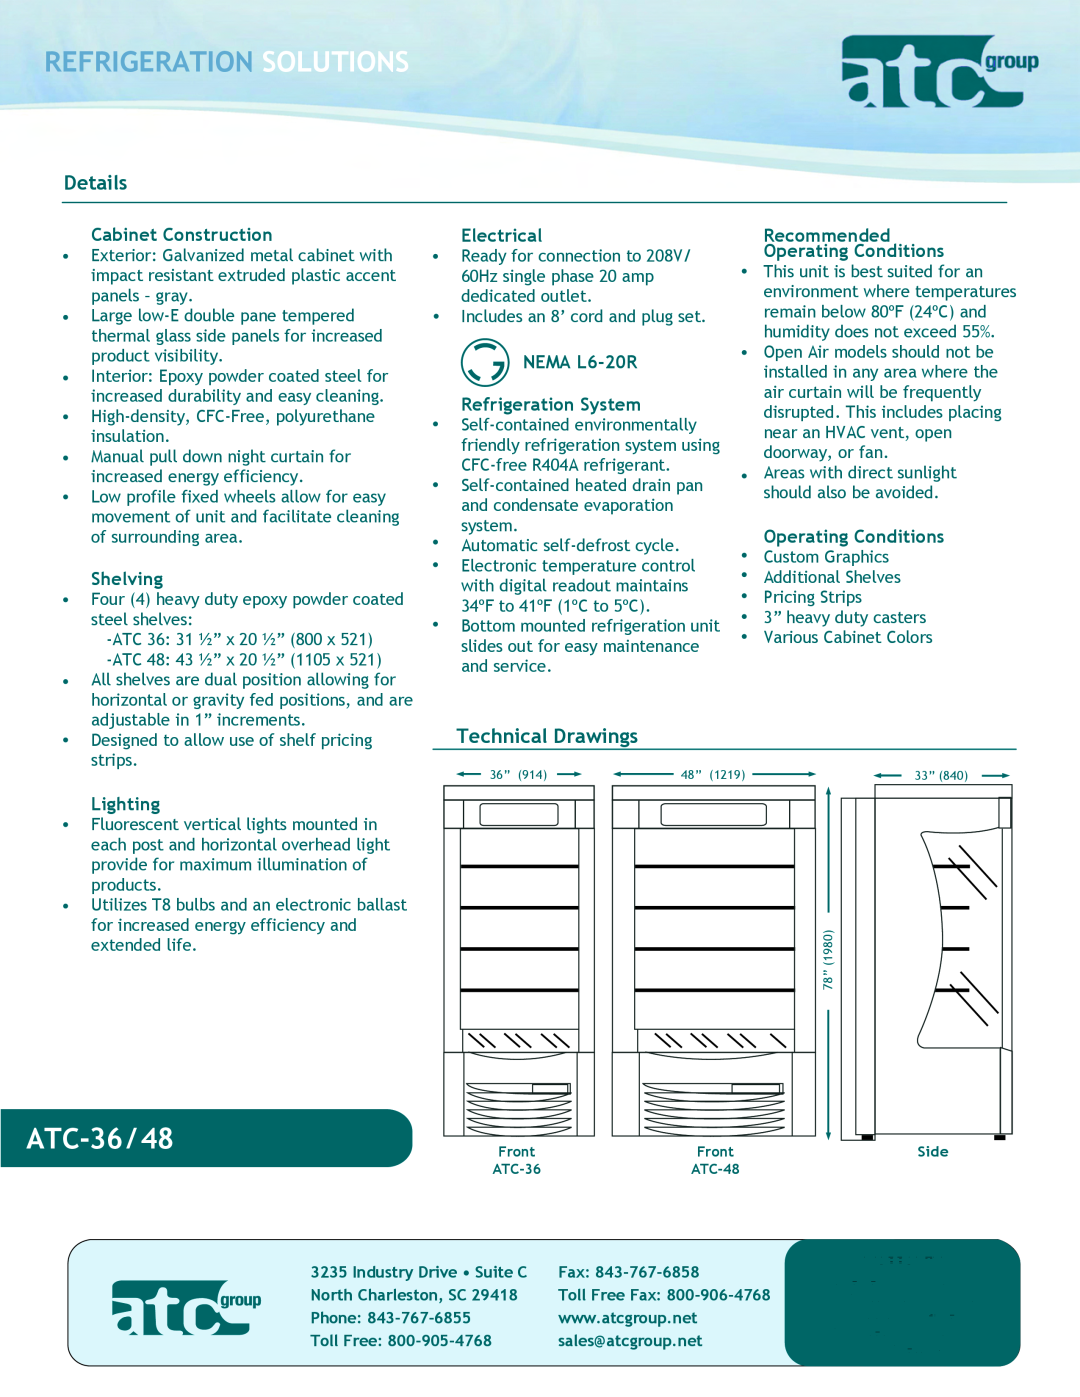 ATC Group ATC48 ATC-36/48, Refrigeration Solutions, Details, Technical Drawings, Cabinet Construction, Shelving, Lighting 